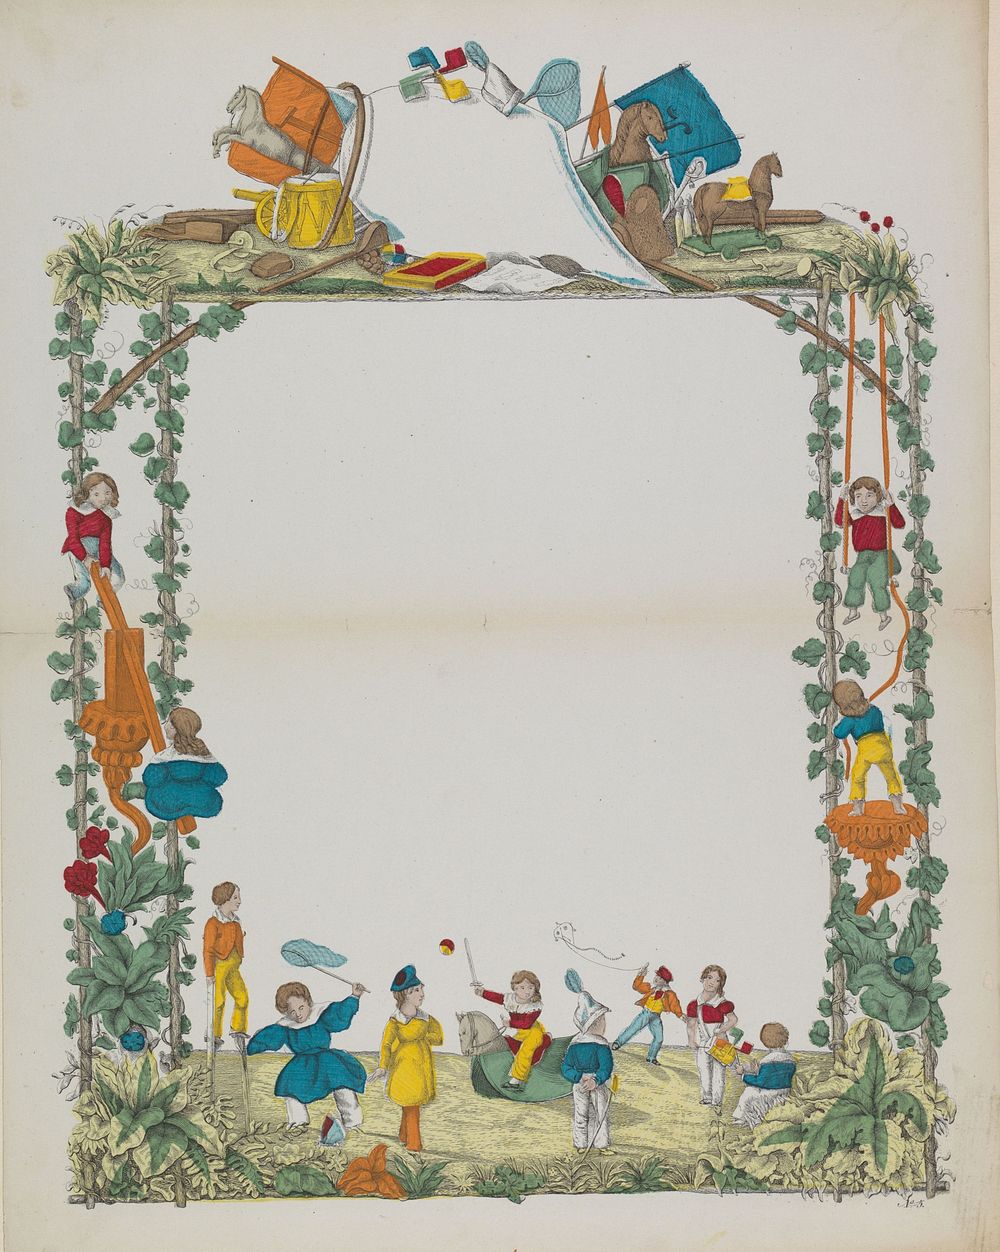 Wensbrief met spelende kinderen (c. 1780 - c. 1899) by anonymous and anonymous